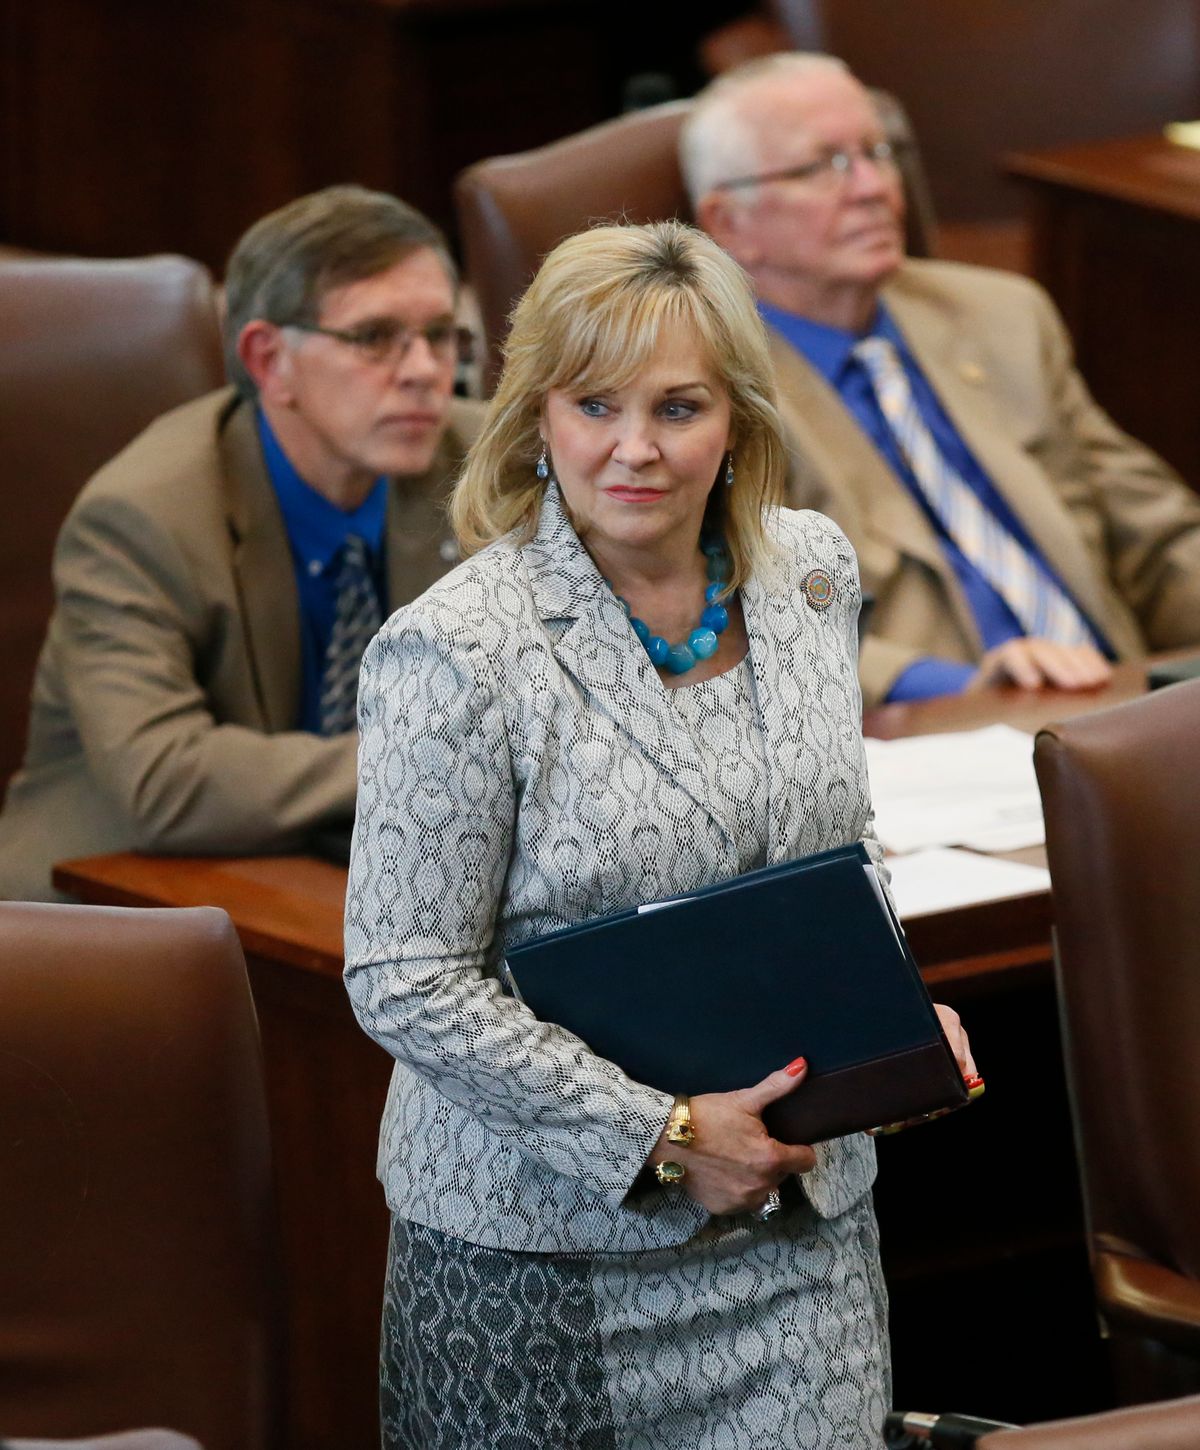 In this May 18, 2016, file  photo, Oklahoma Gov. Mary Fallin walks on the floor of the Oklahoma House in Oklahoma City. Gov. Fallin has vetoed legislation that would make it a felony for doctors to perform an abortion, a measure that would have effectively outlawed the procedure in the state. The Republican governor issued her veto Friday, May 20, 2016, saying the bill was vague and would not withstand a legal challenge. (AP Photo/Sue Ogrocki, File) (AP)